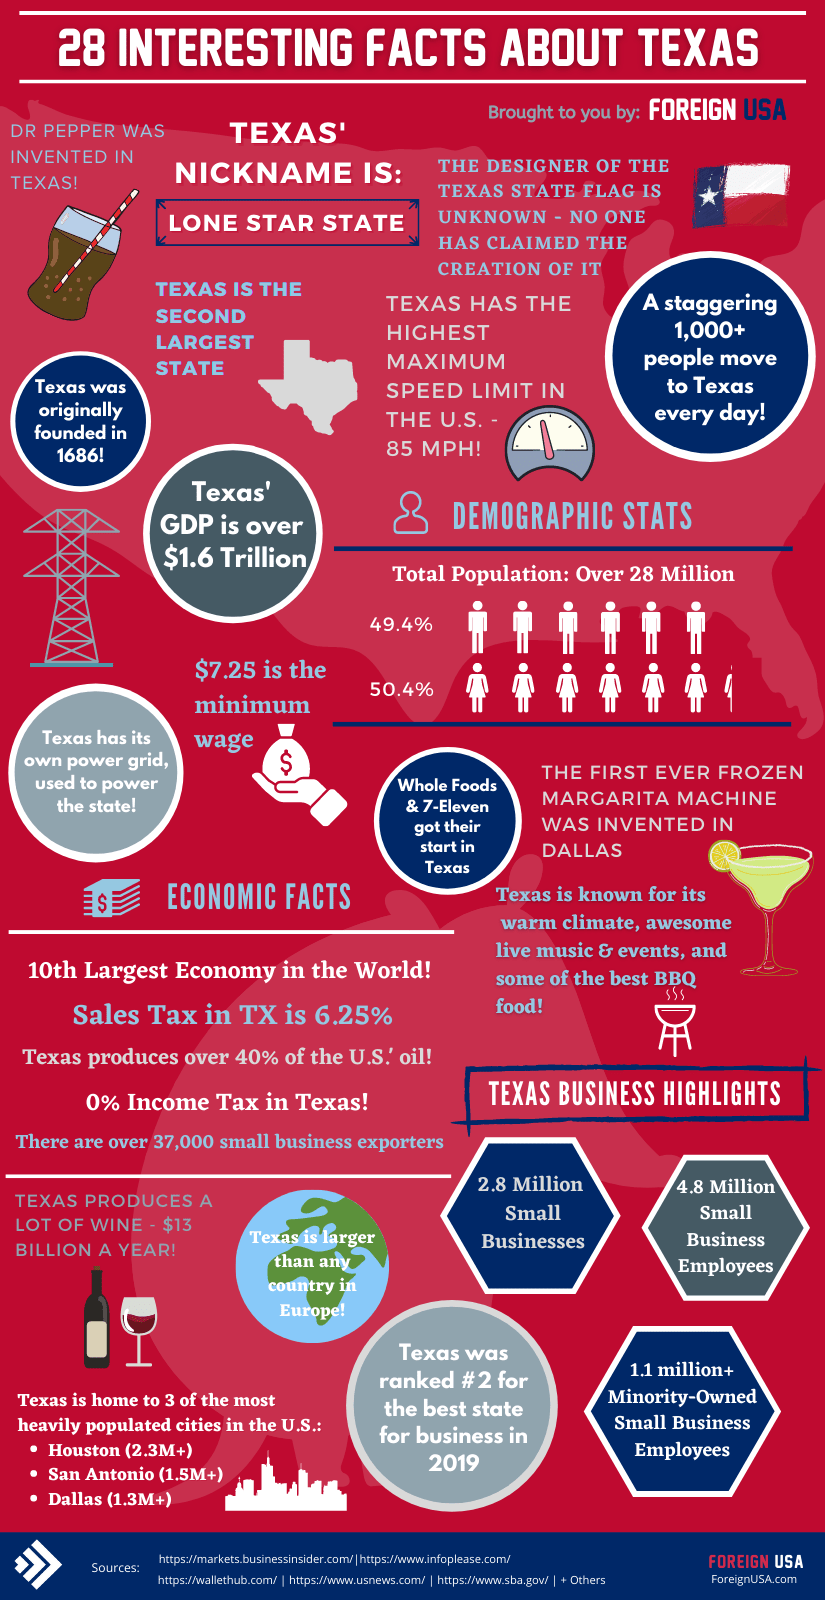 Cool facts about Texas